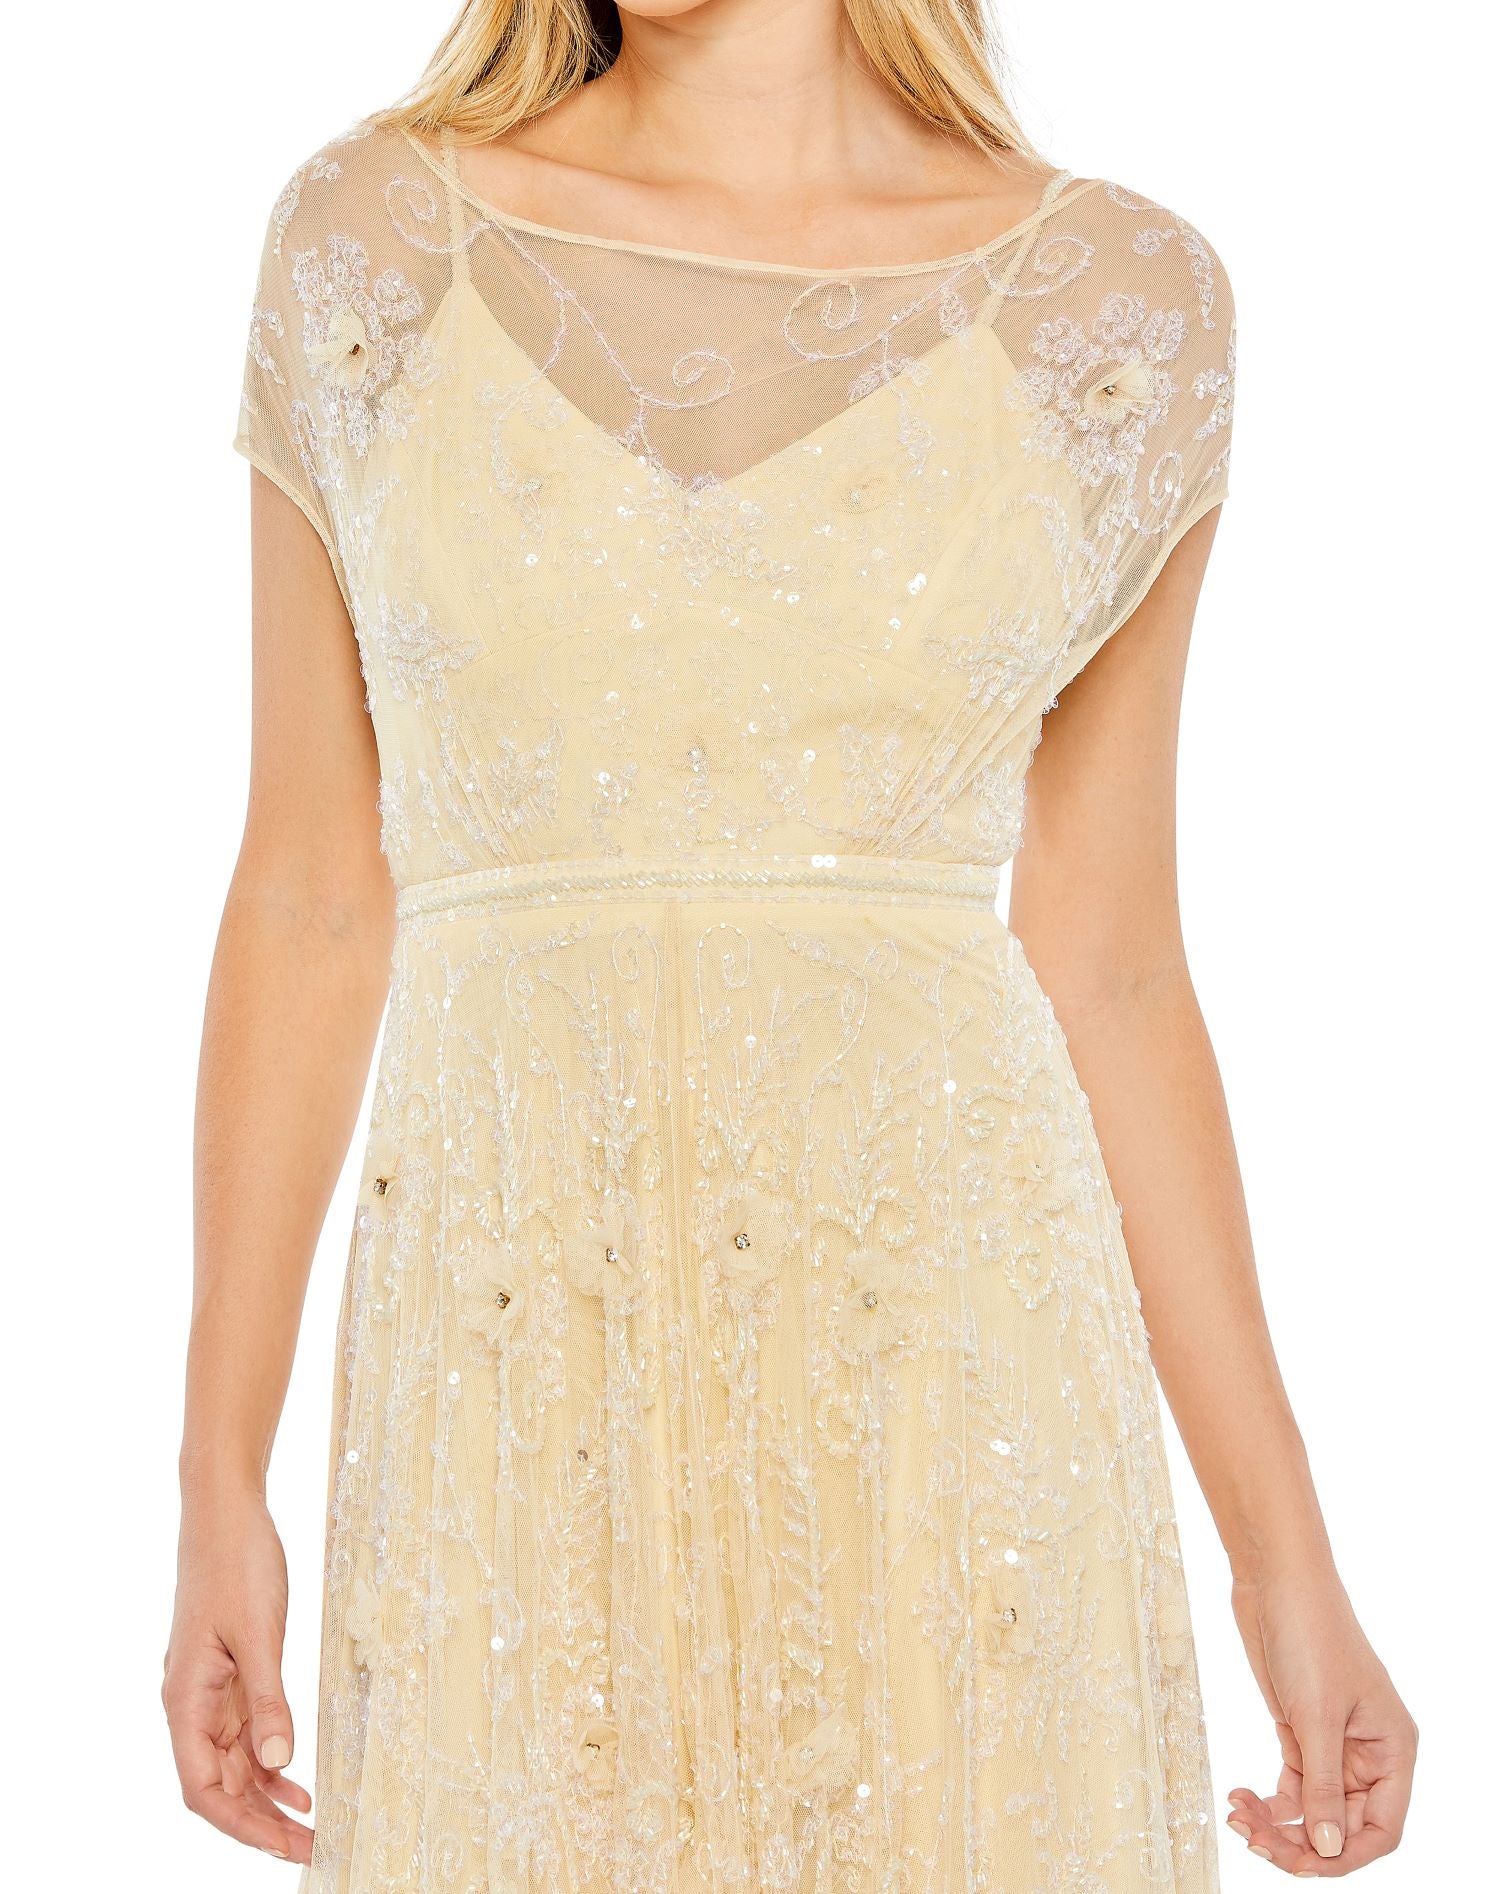 Embellished Illusion Cap Sleeve Gown